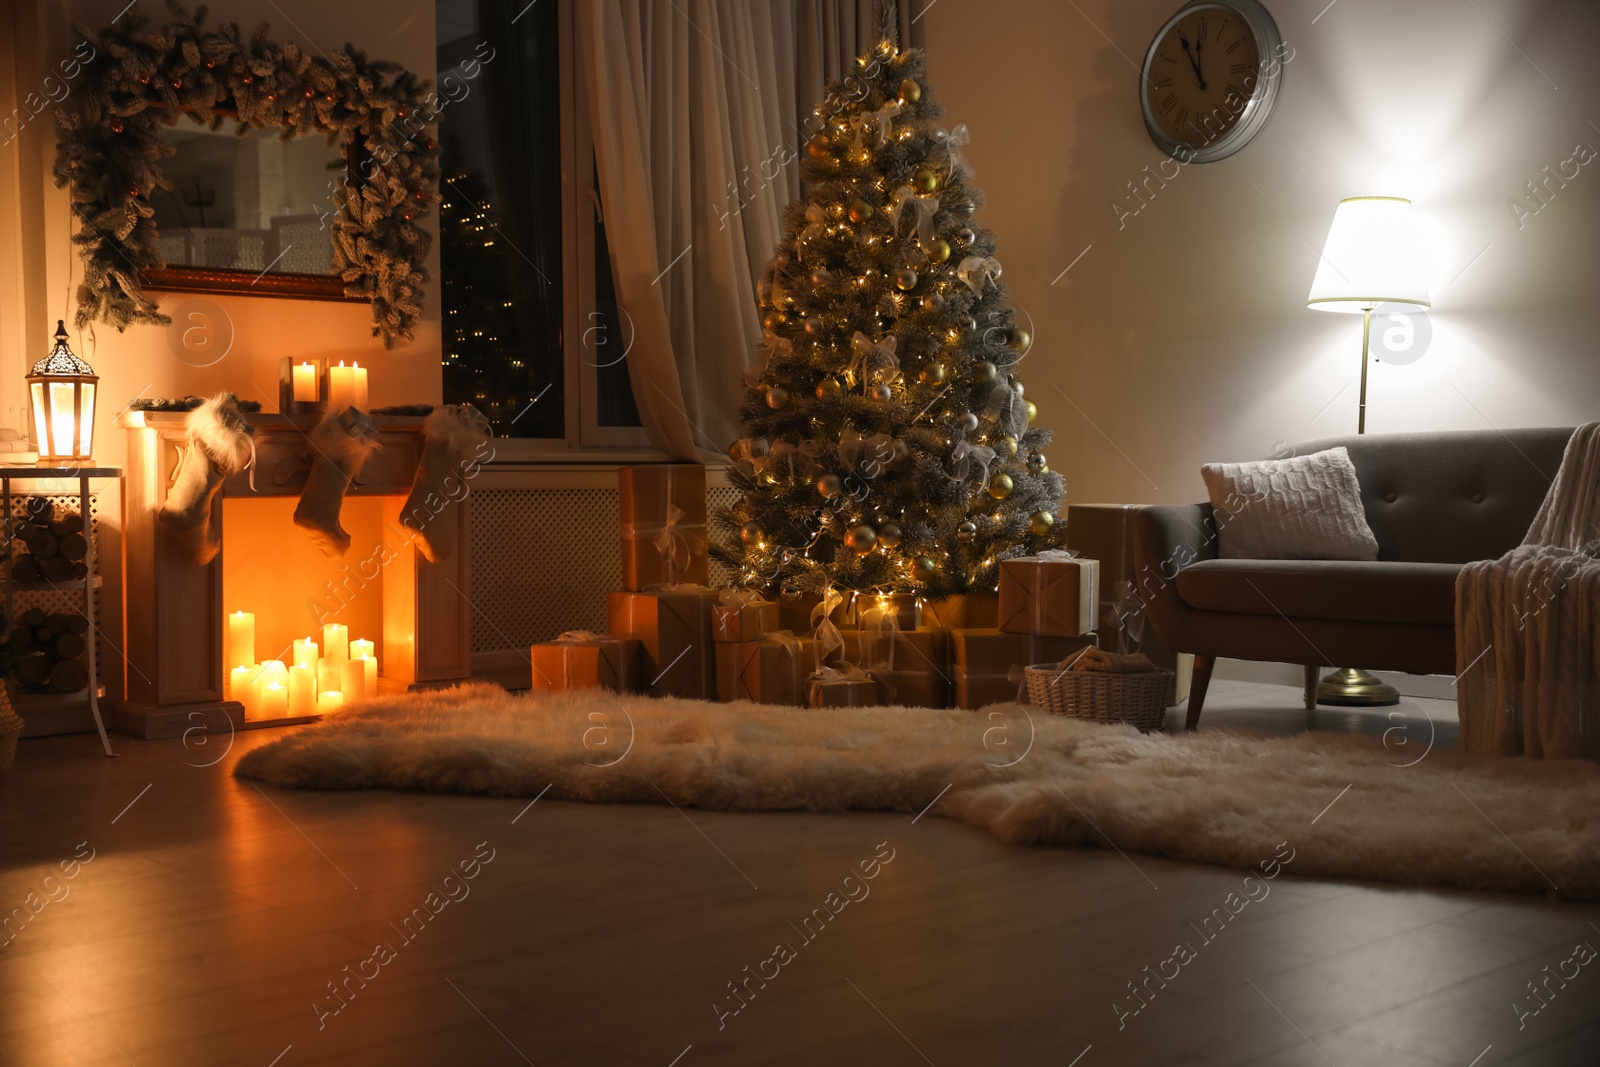 Photo of Stylish interior with beautiful Christmas tree and decorative fireplace at night